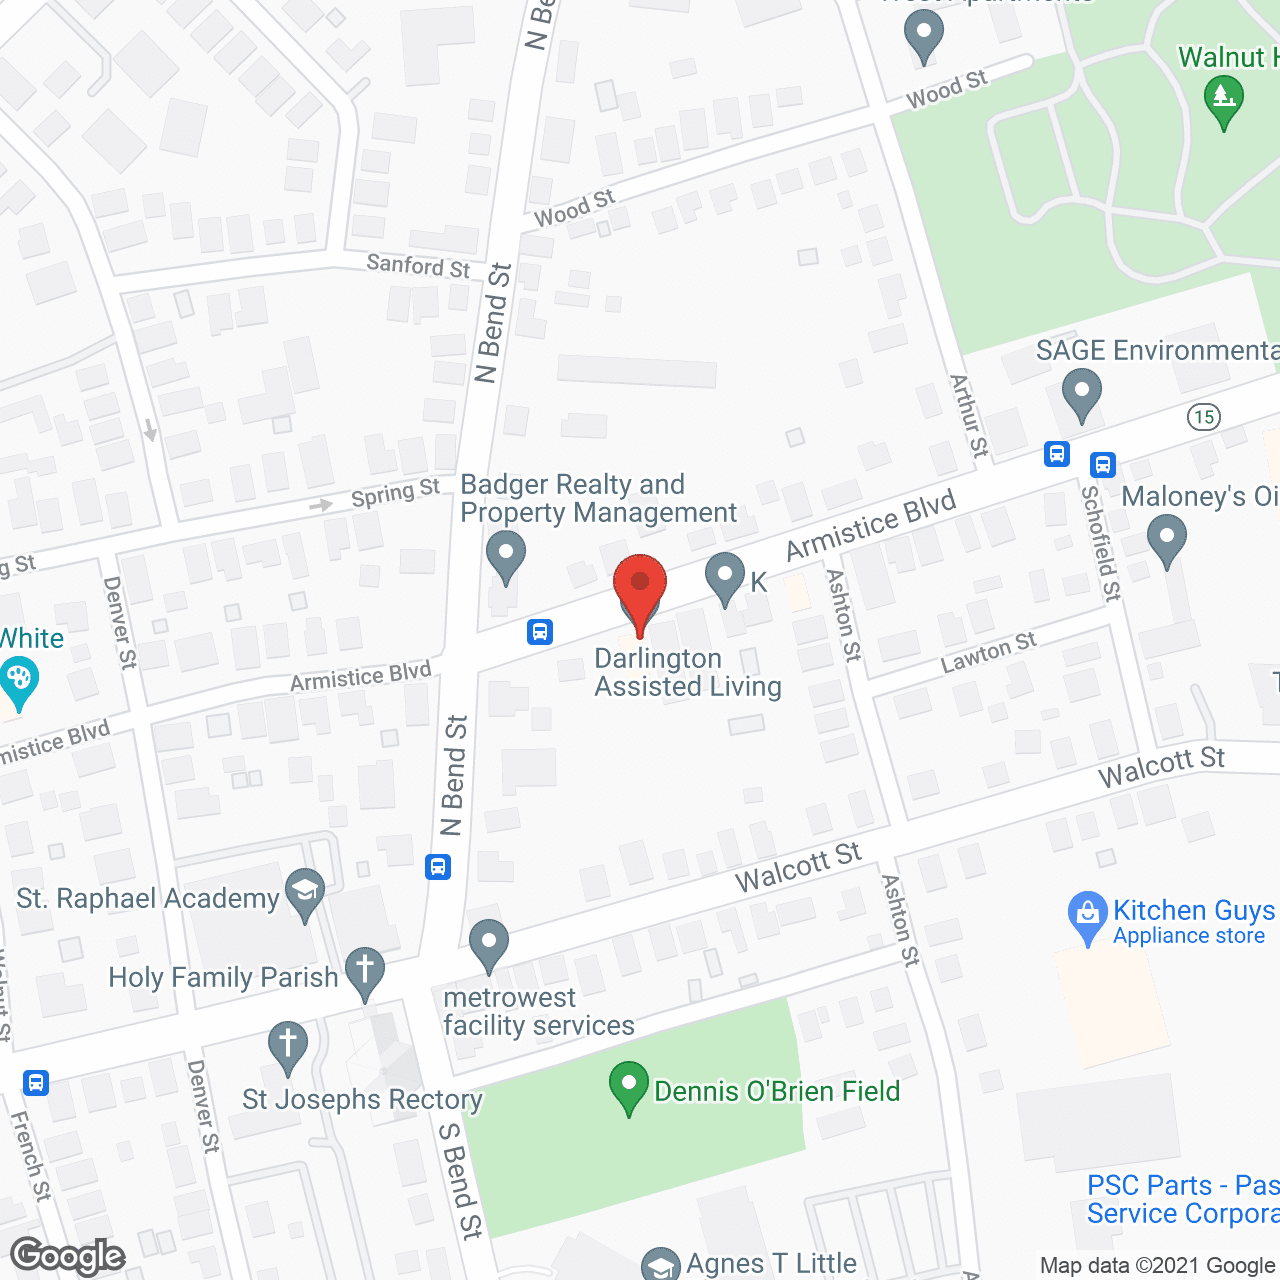 Darlington Assisted Living Centers in google map